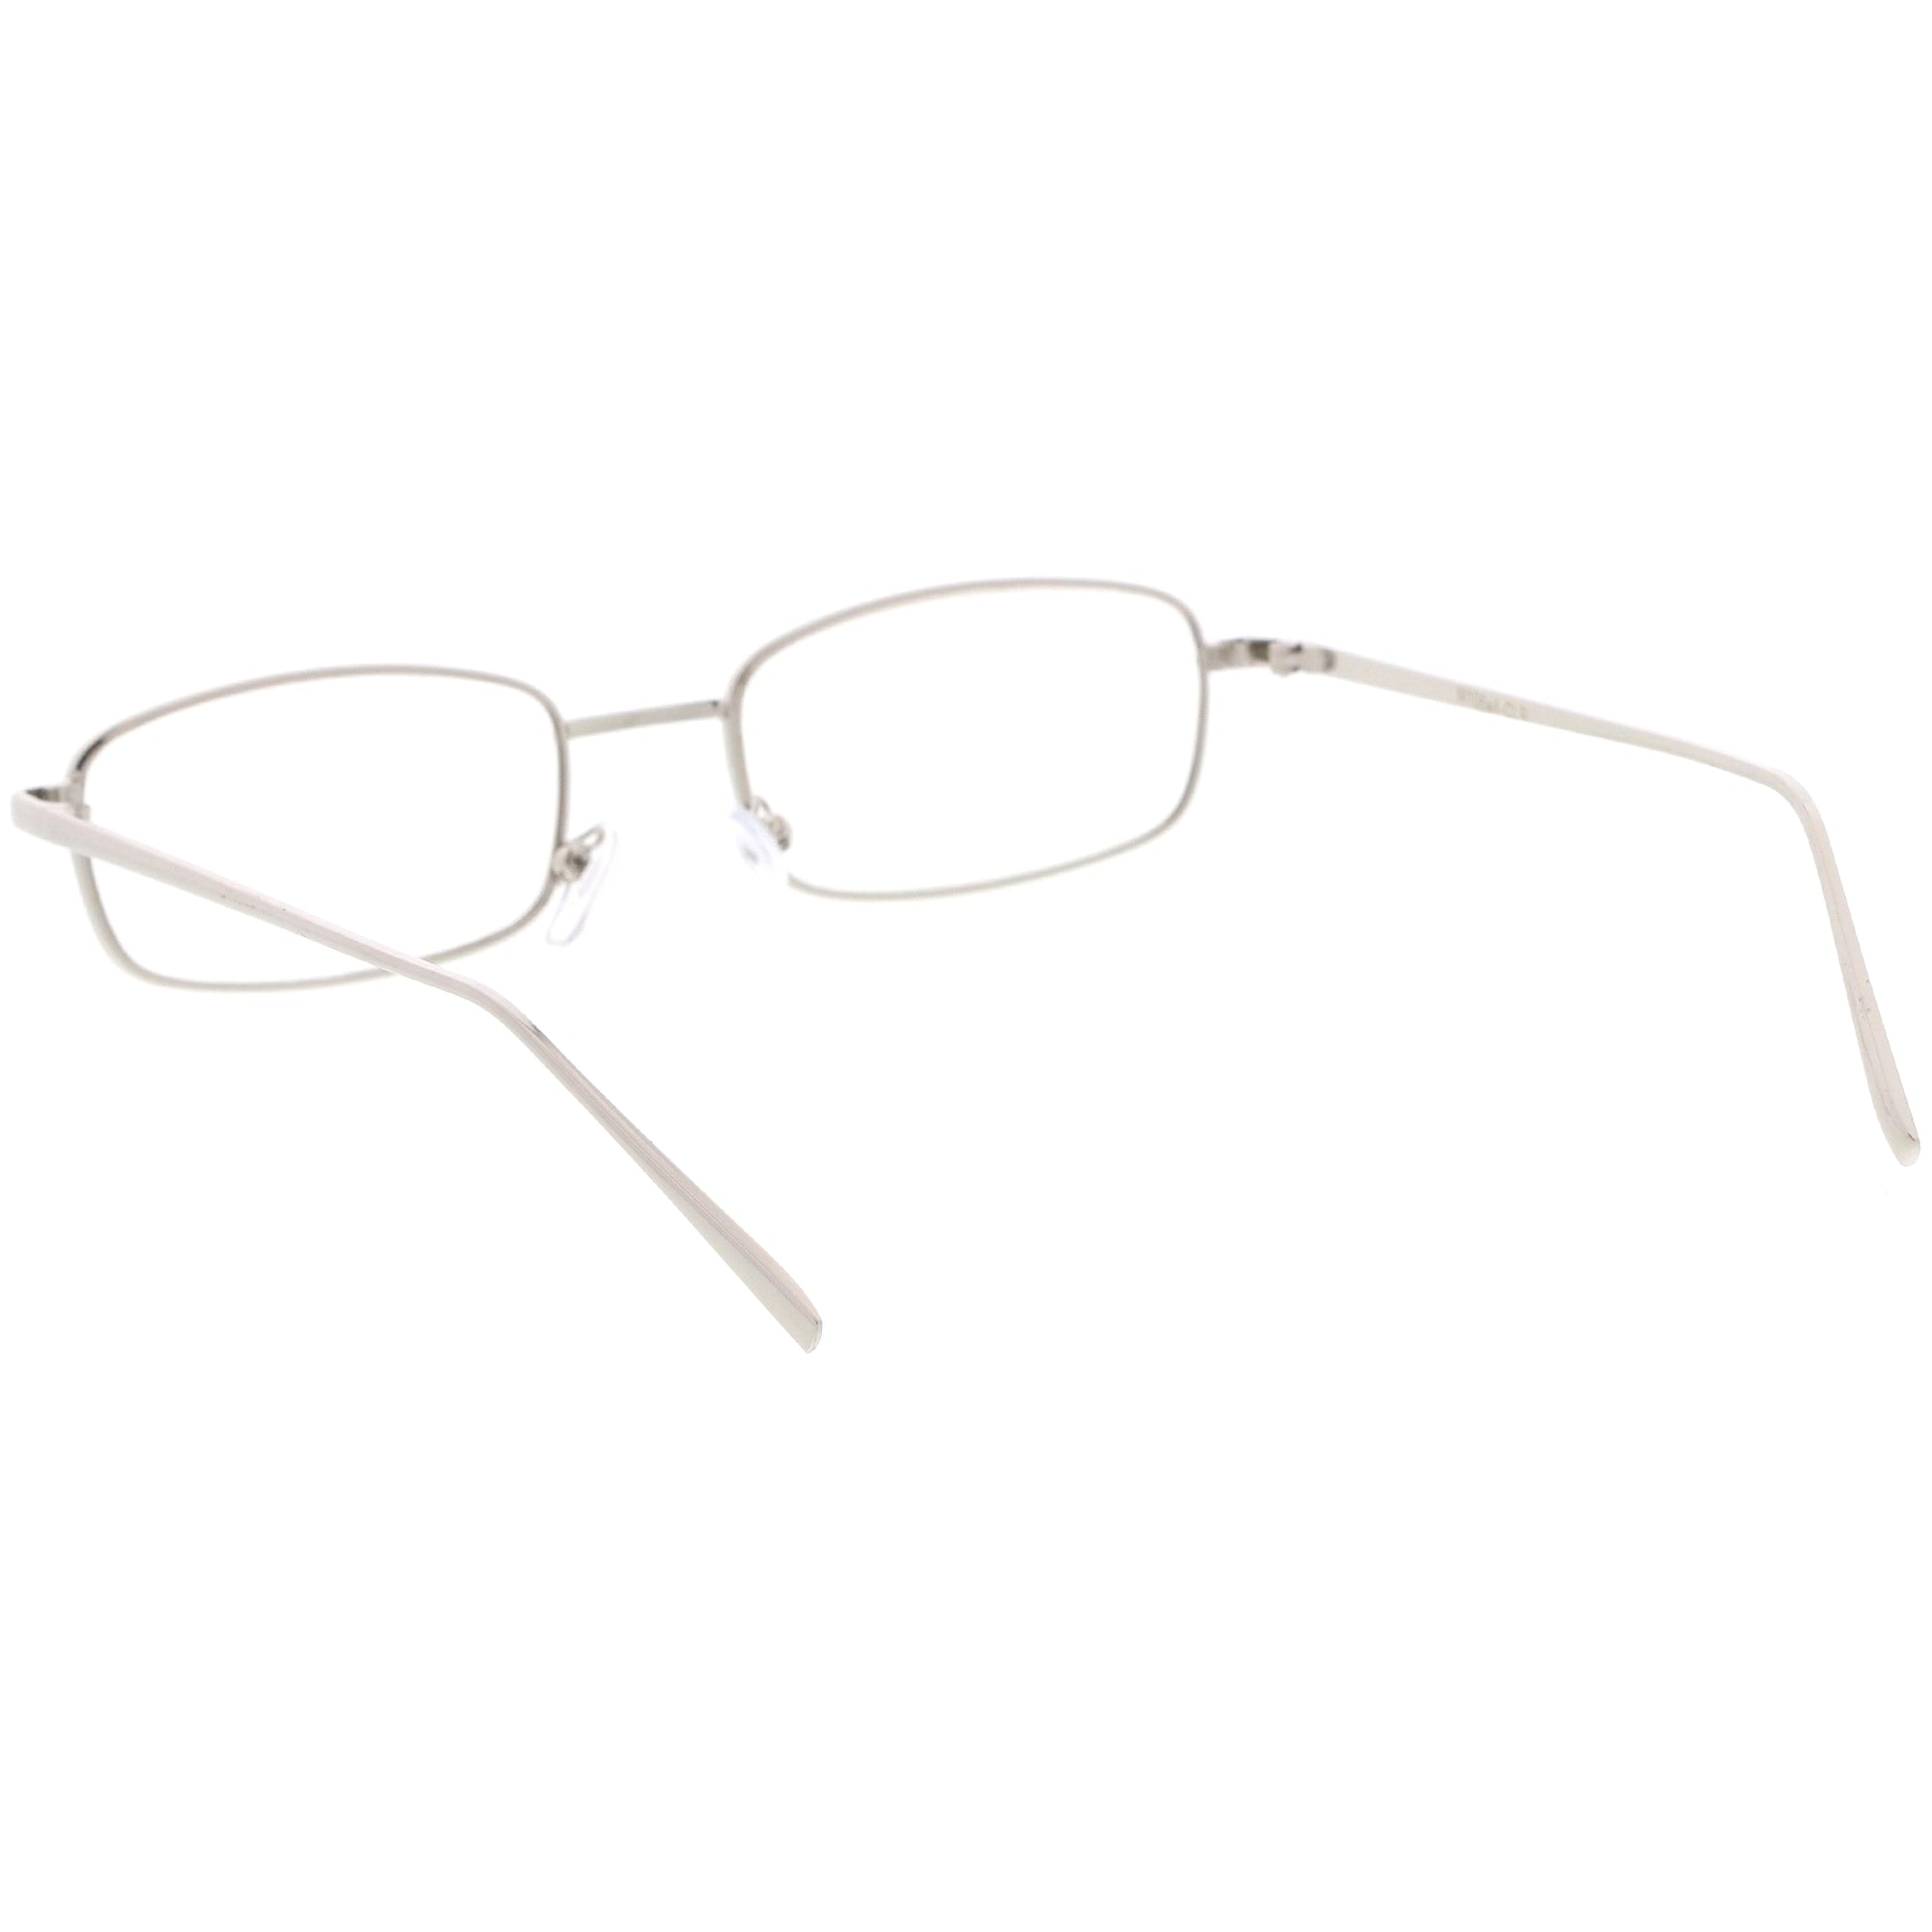 Classic Vintage Inspired Rectangle Flat Clear Lens Glasses - zeroUV